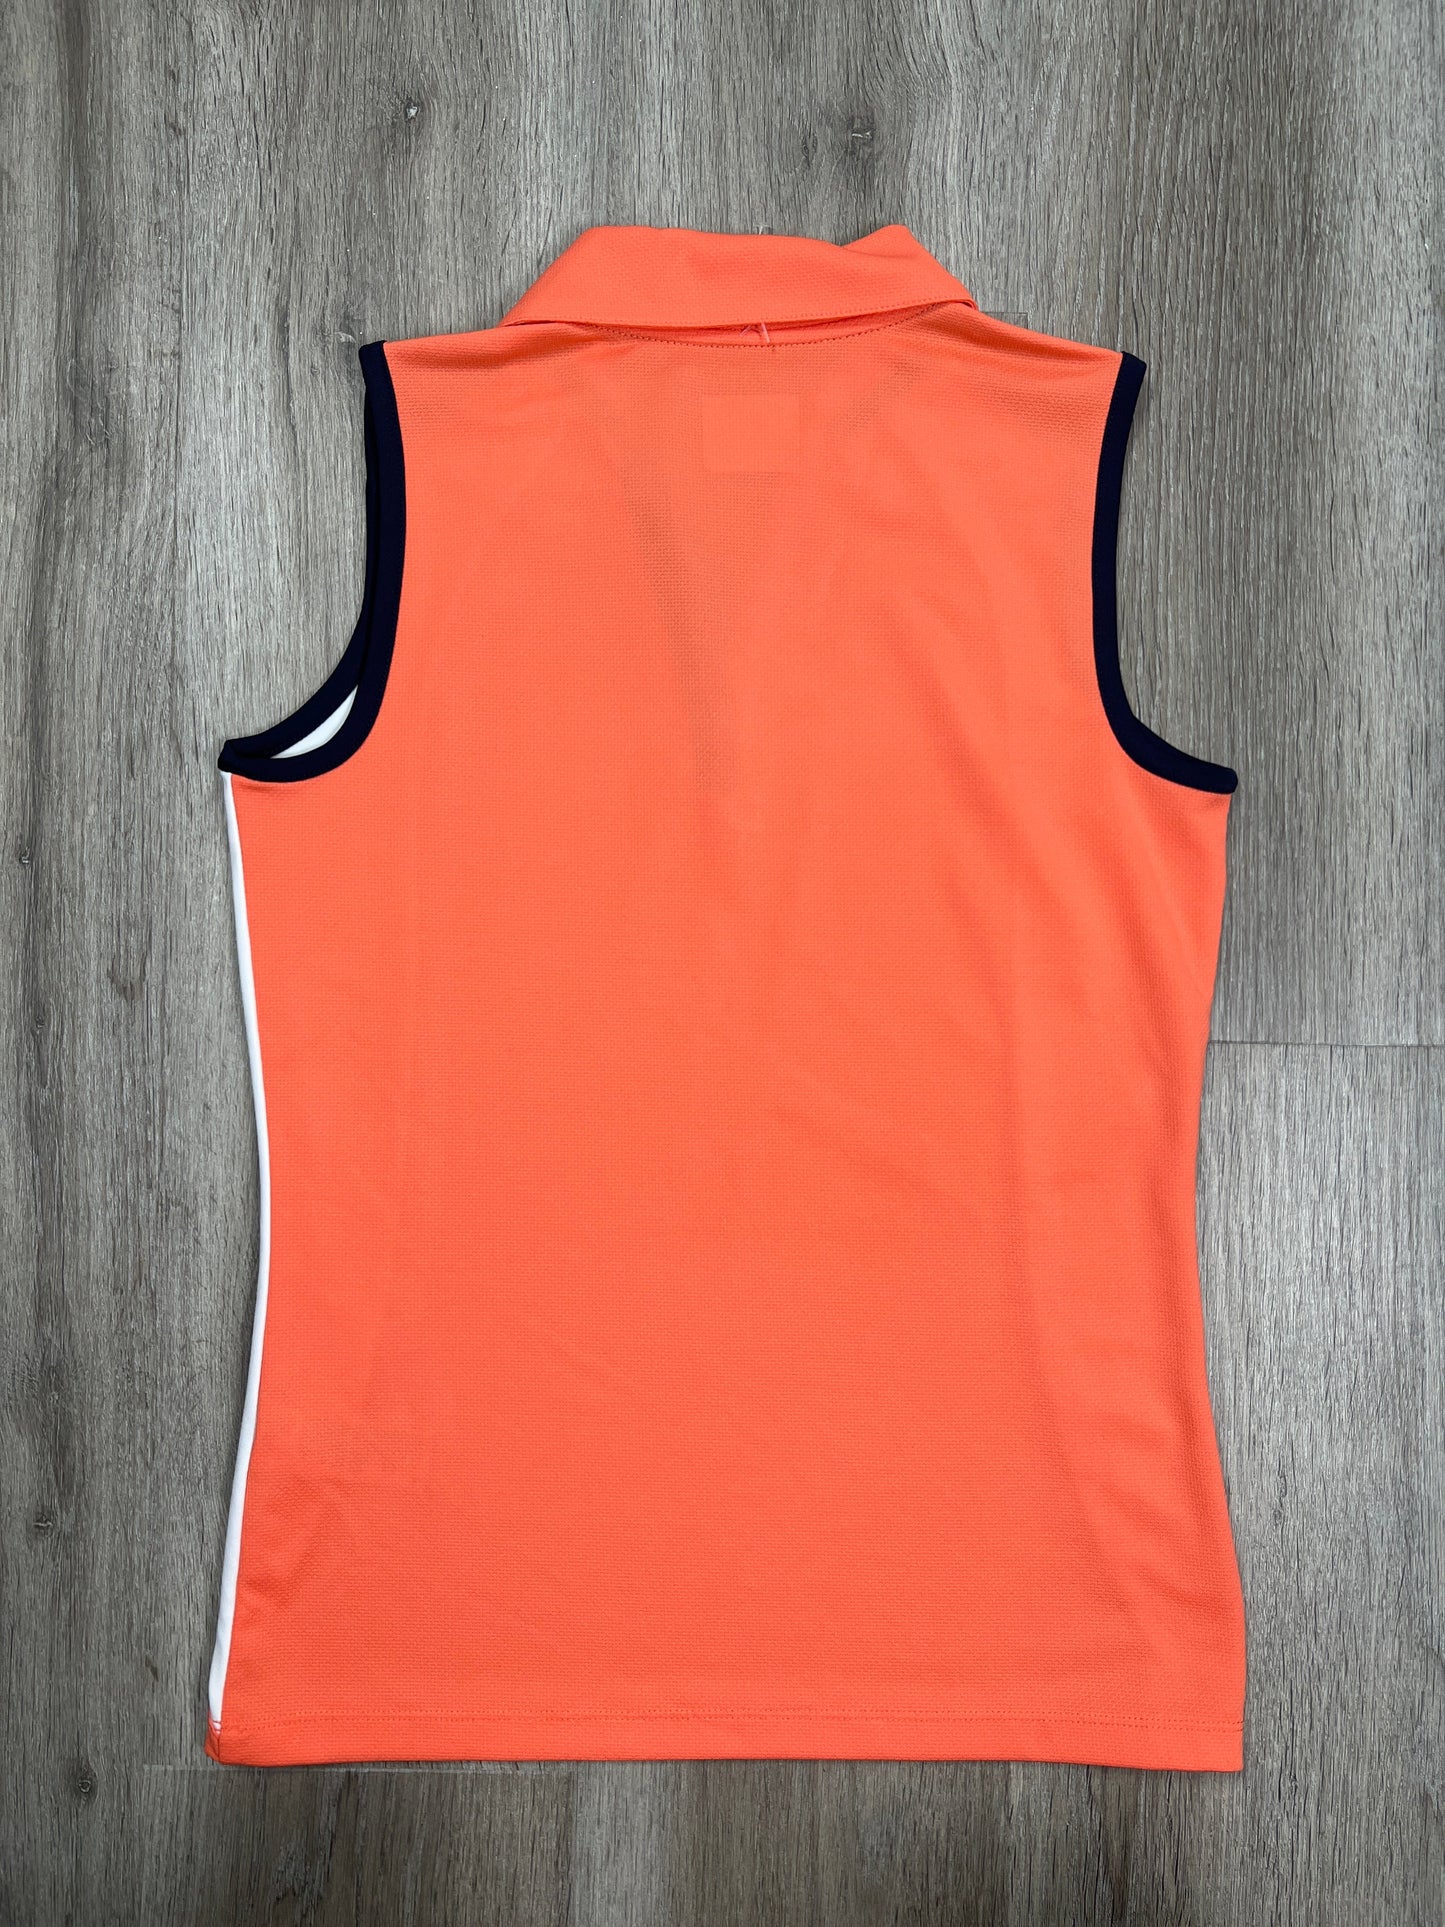 Athletic Tank Top By Izod  Size: Xs